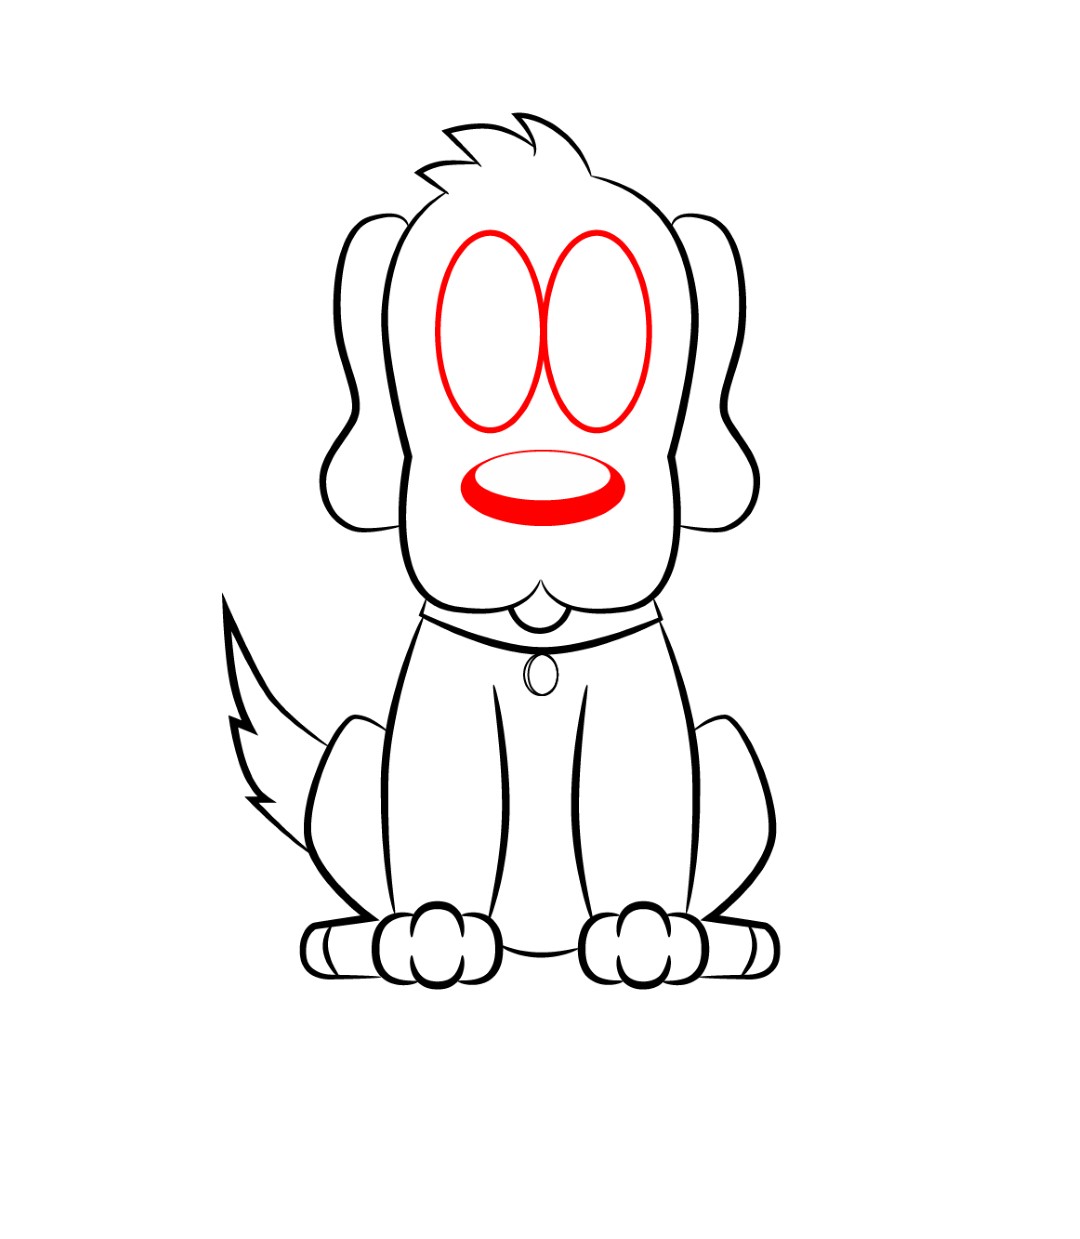 How To Draw A Cartoon Dog - Draw Central